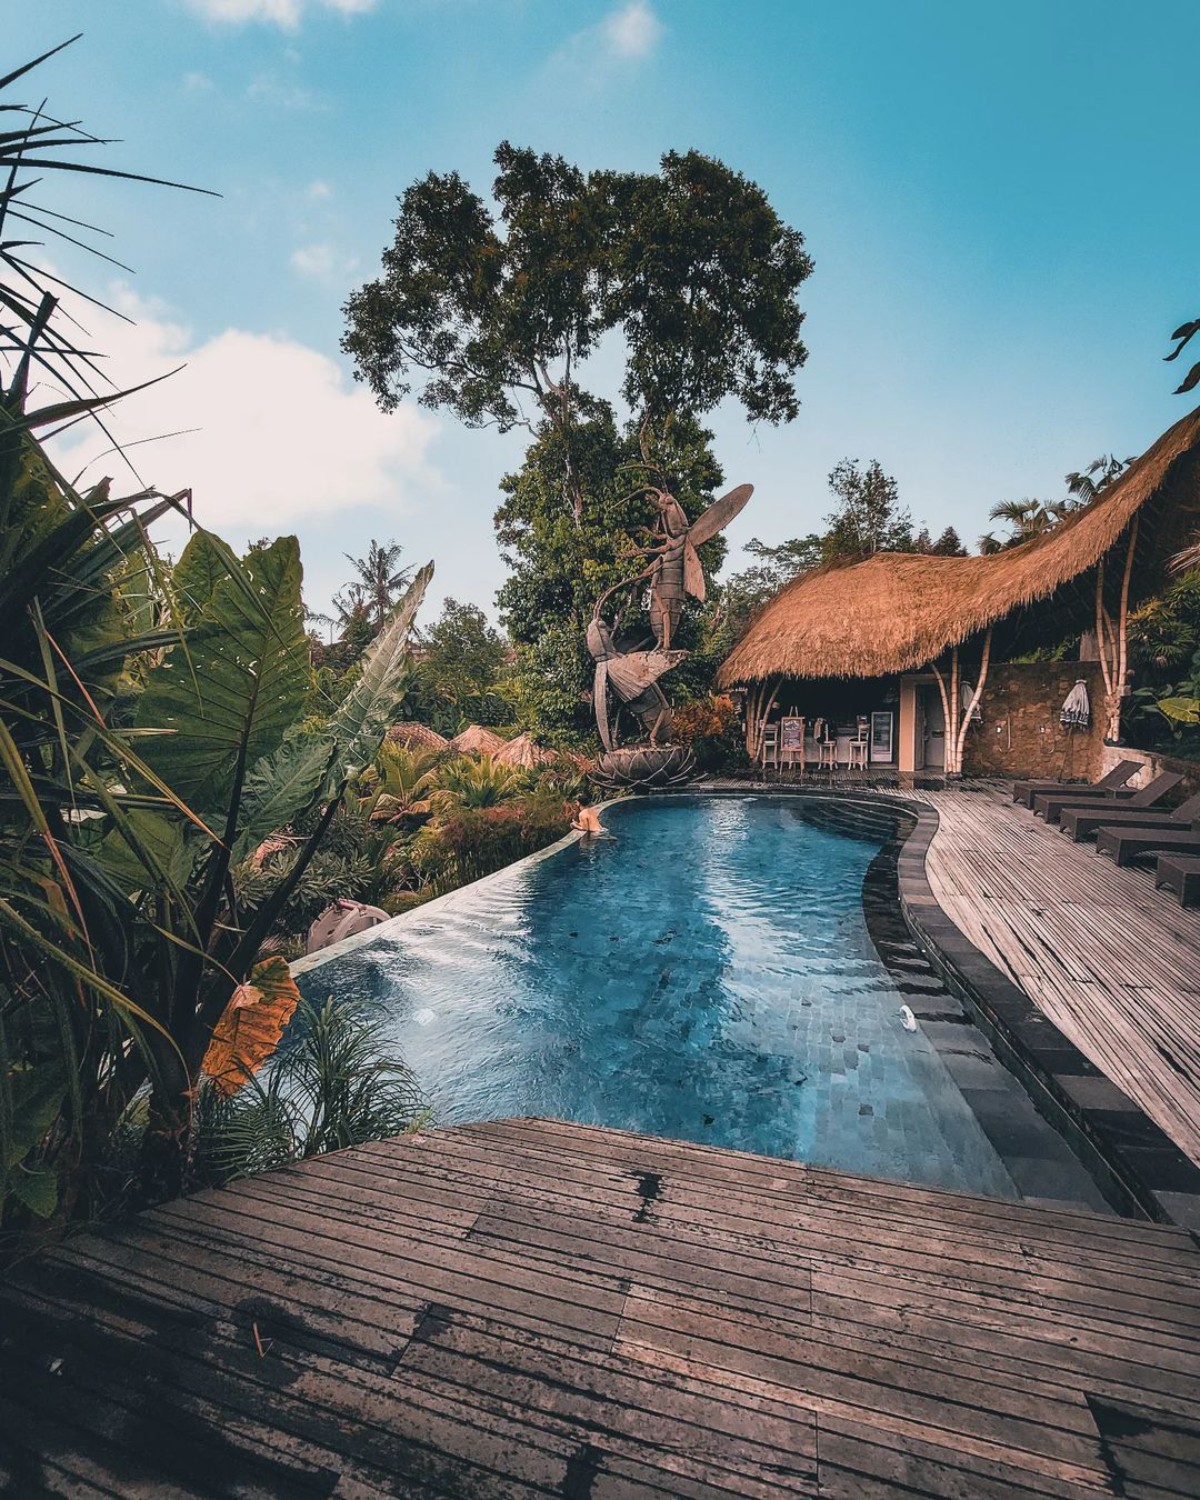 A pristine pool set against a backdrop of thatched huts and tall sculptures, surrounded by lush tropical foliage under a sunlit sky.